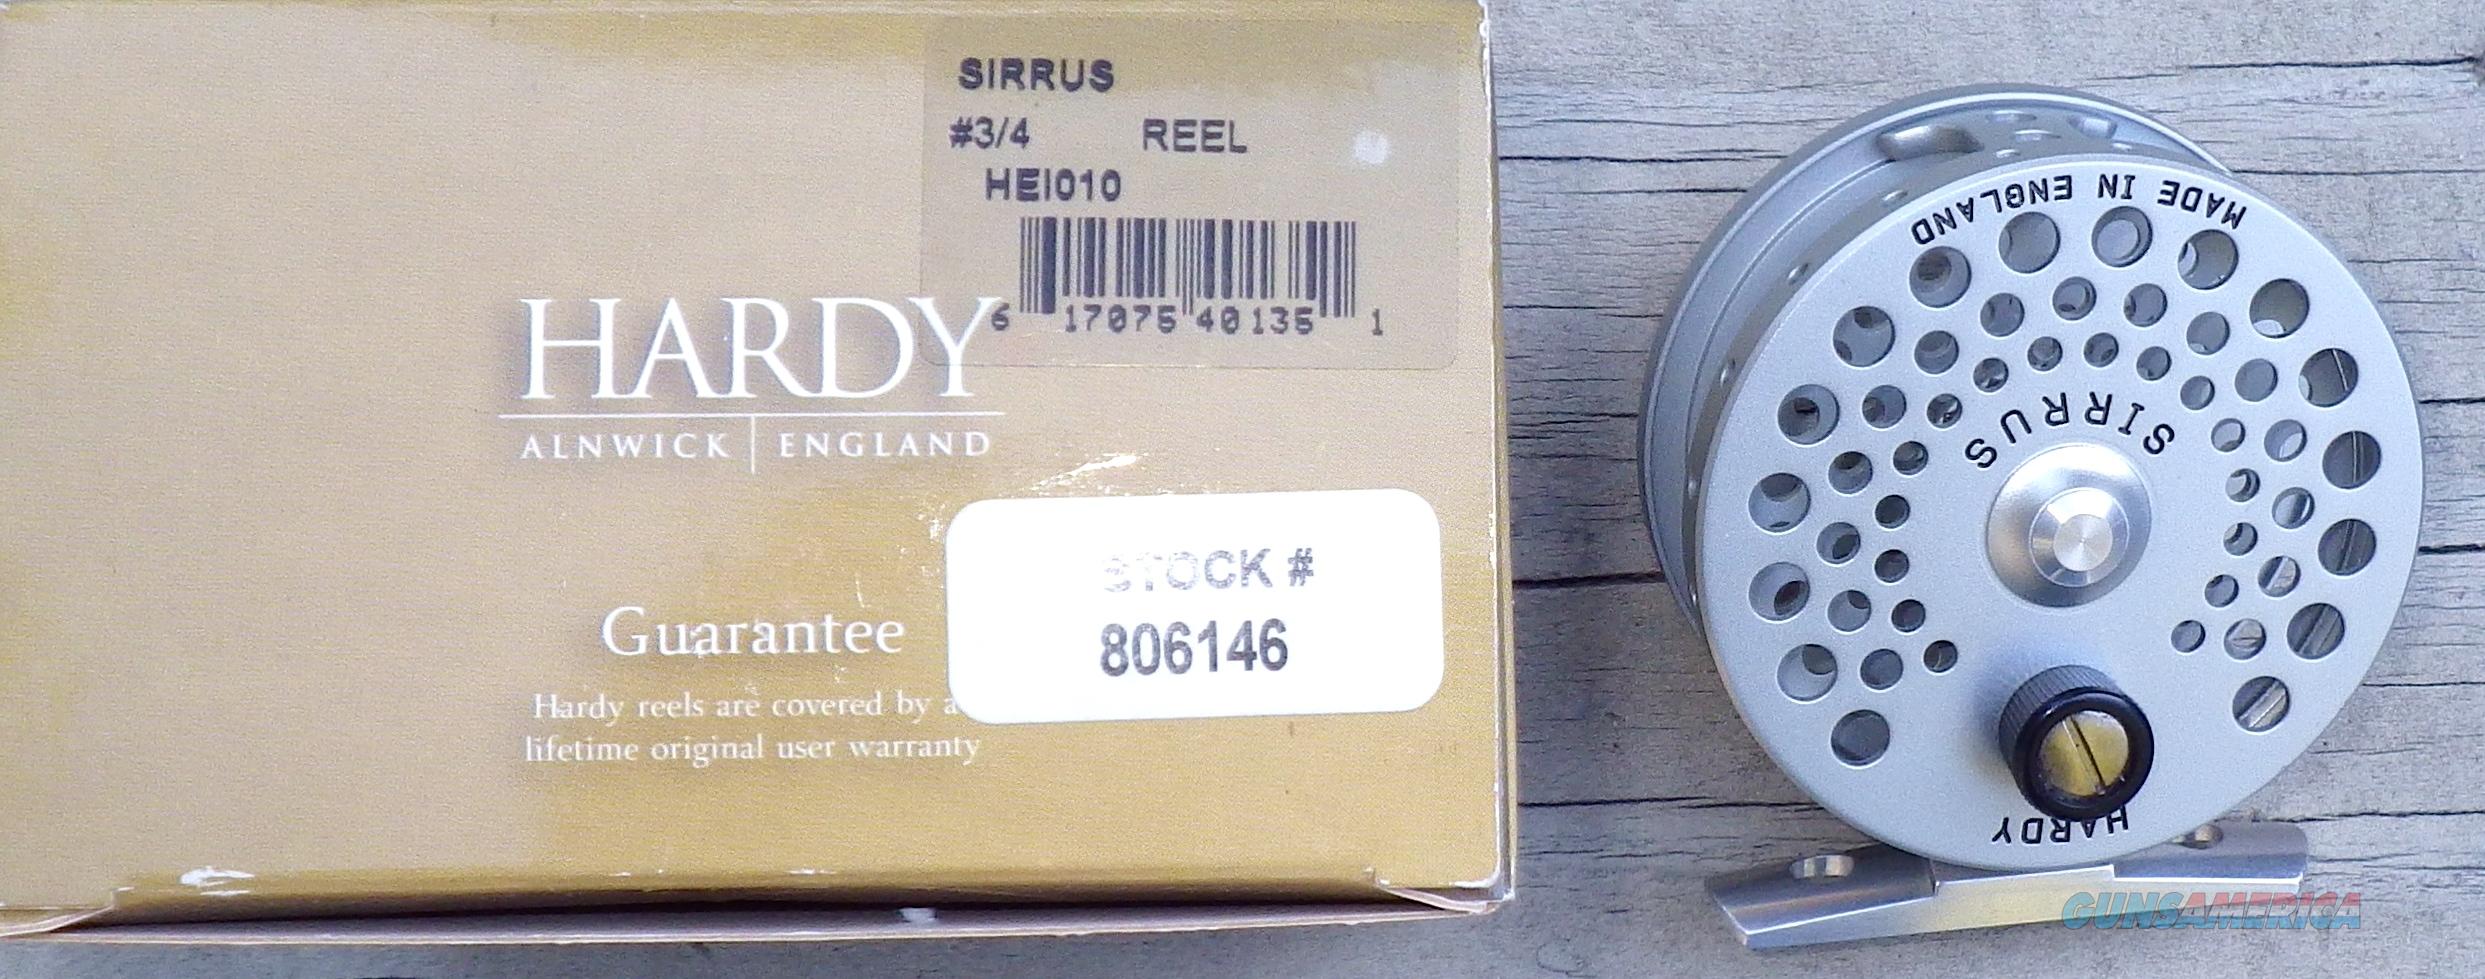 Hardy Sirrus 3/4 fly reel, NIB, mad for sale at :  937144489